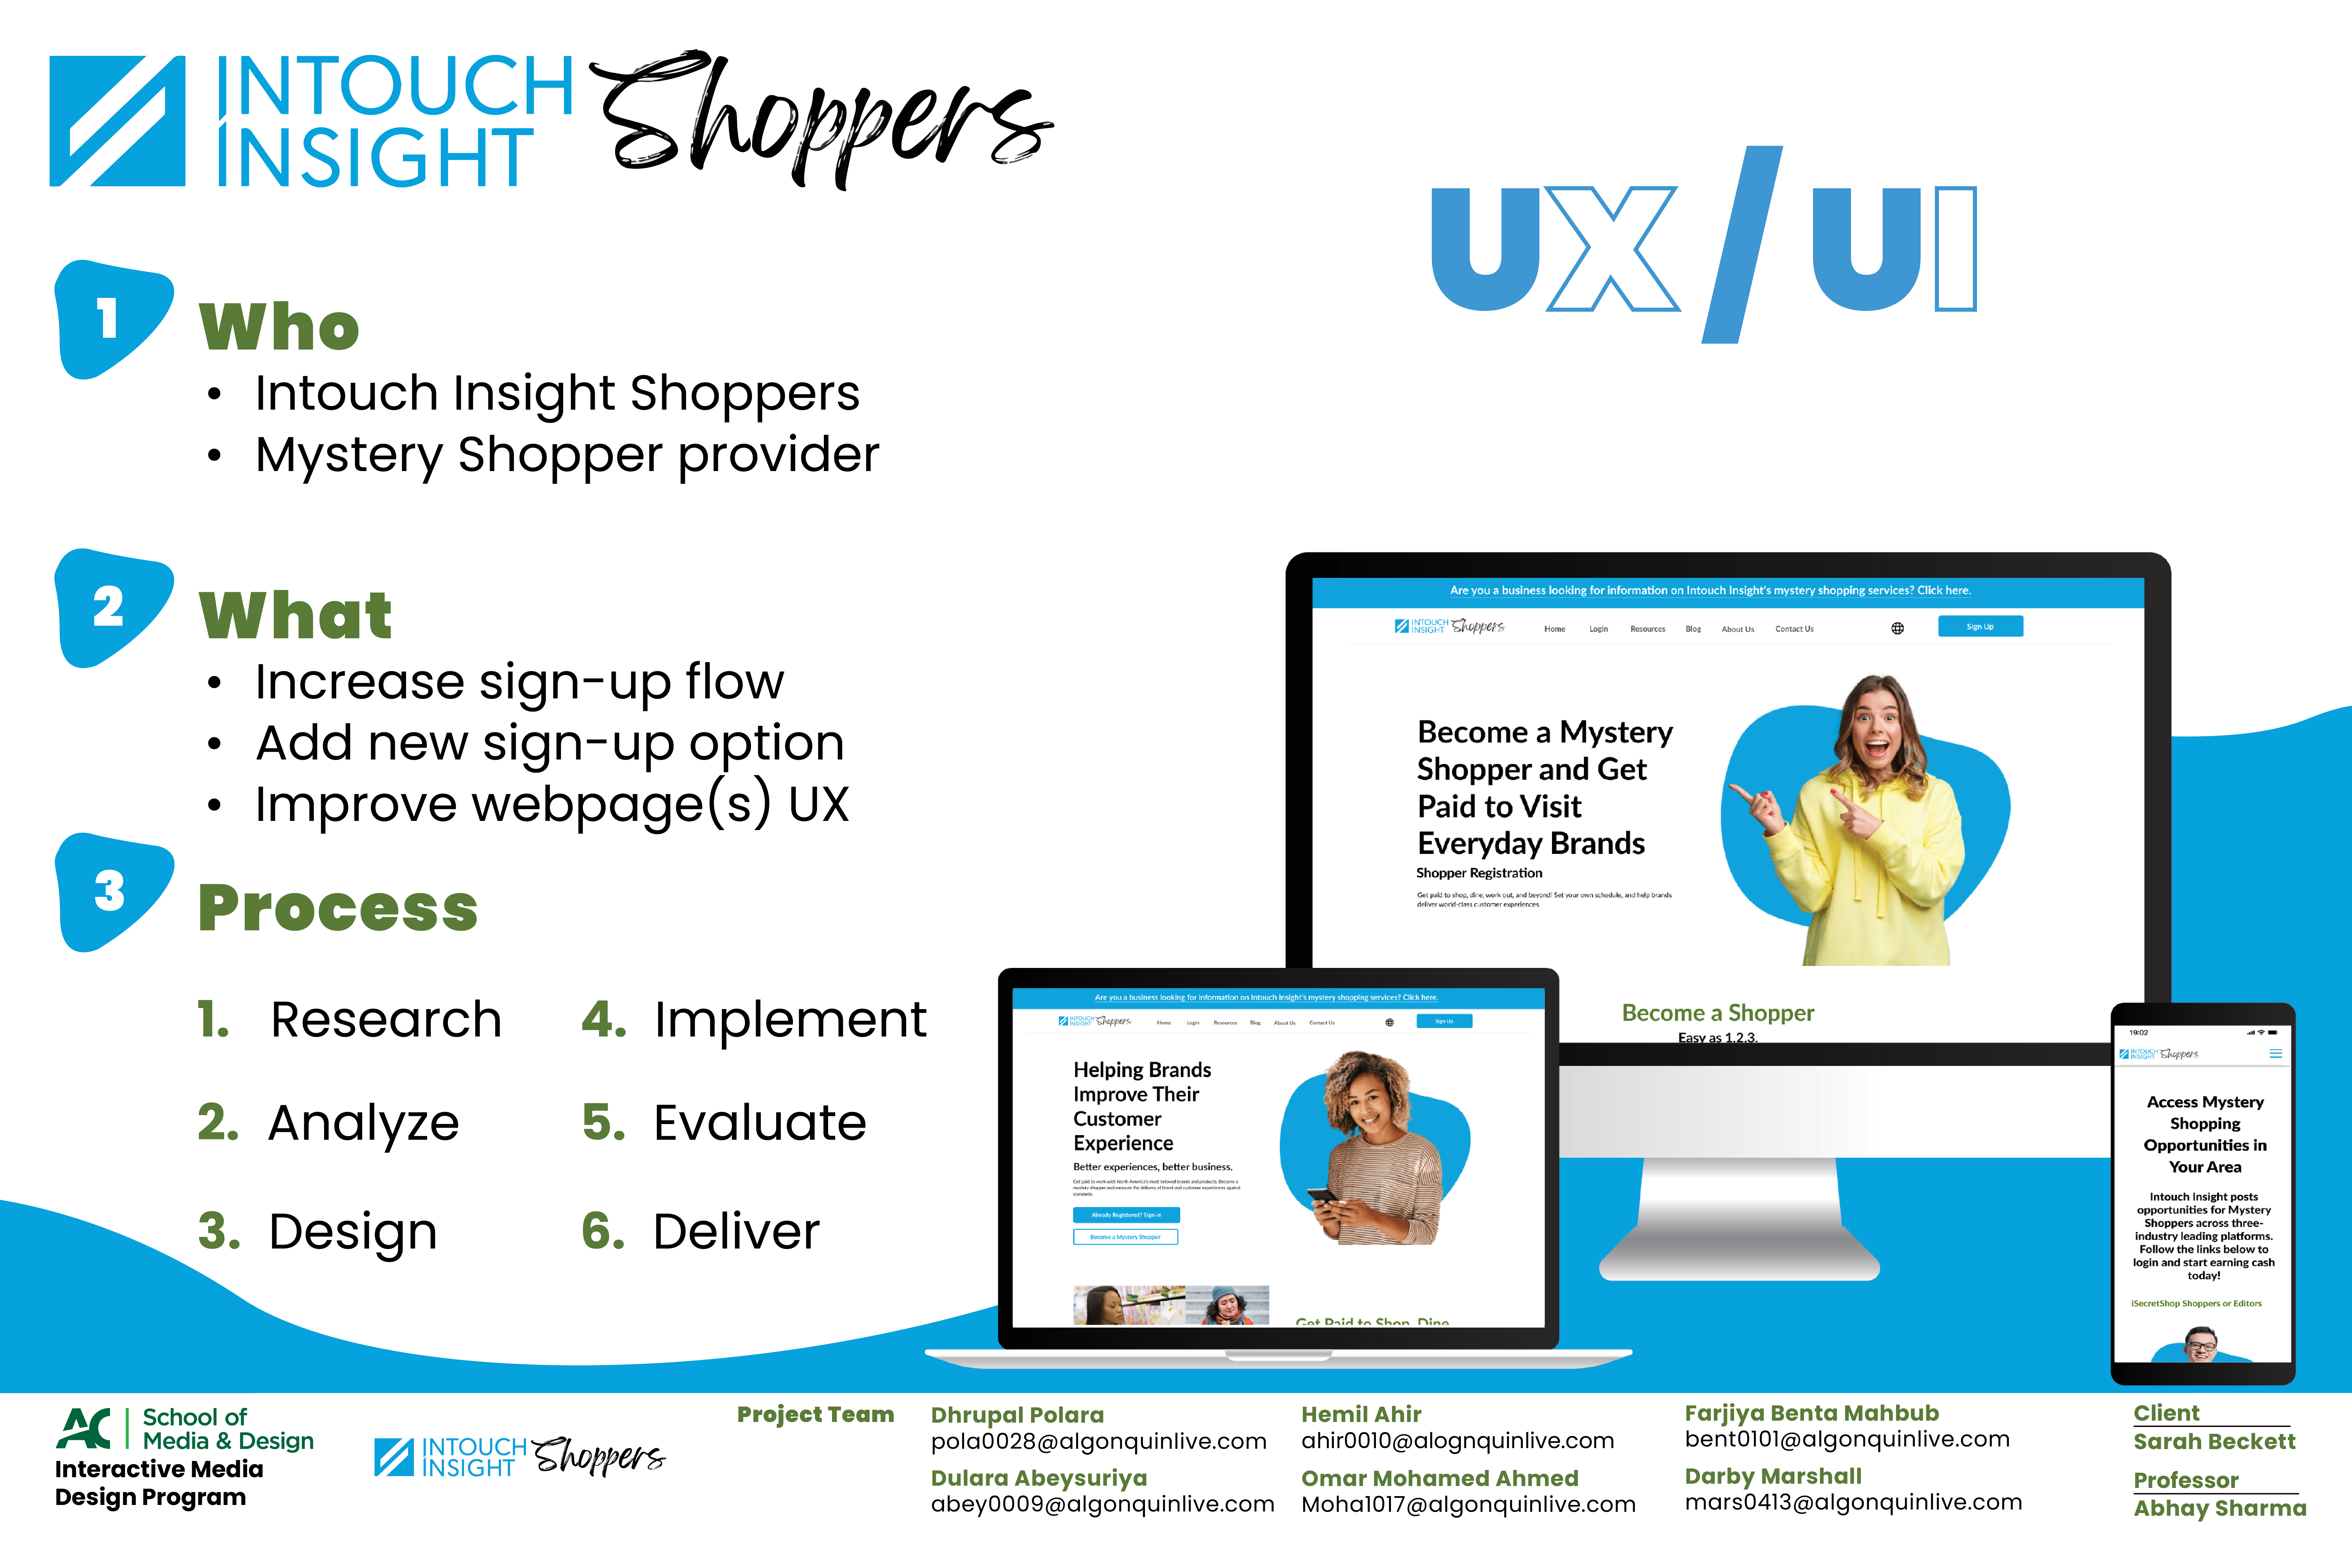 A UX and UI project aimed at enhancing Intouch Insight's Shoppers website by introducing a new registration option for mystery shoppers. Designed and tested to streamline the sign-up process and improve the overall sign-up flow, ultimately increasing user registrations.